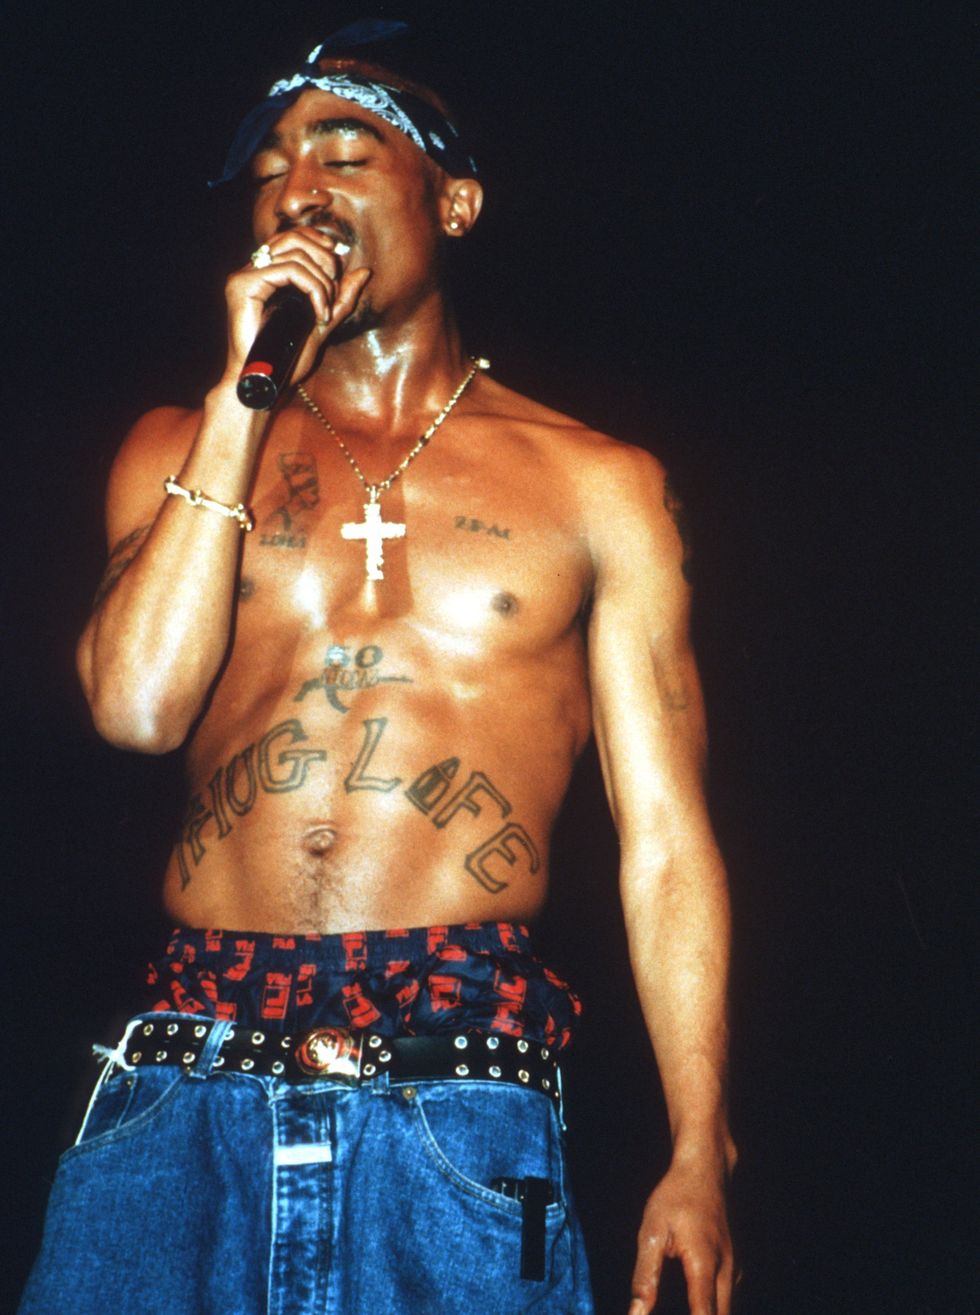 chicago   march 1994 rapper tupac shakur performs onstage in 1994 in chicago, illinois  photo by raymond boydmichael ochs archivesgetty images